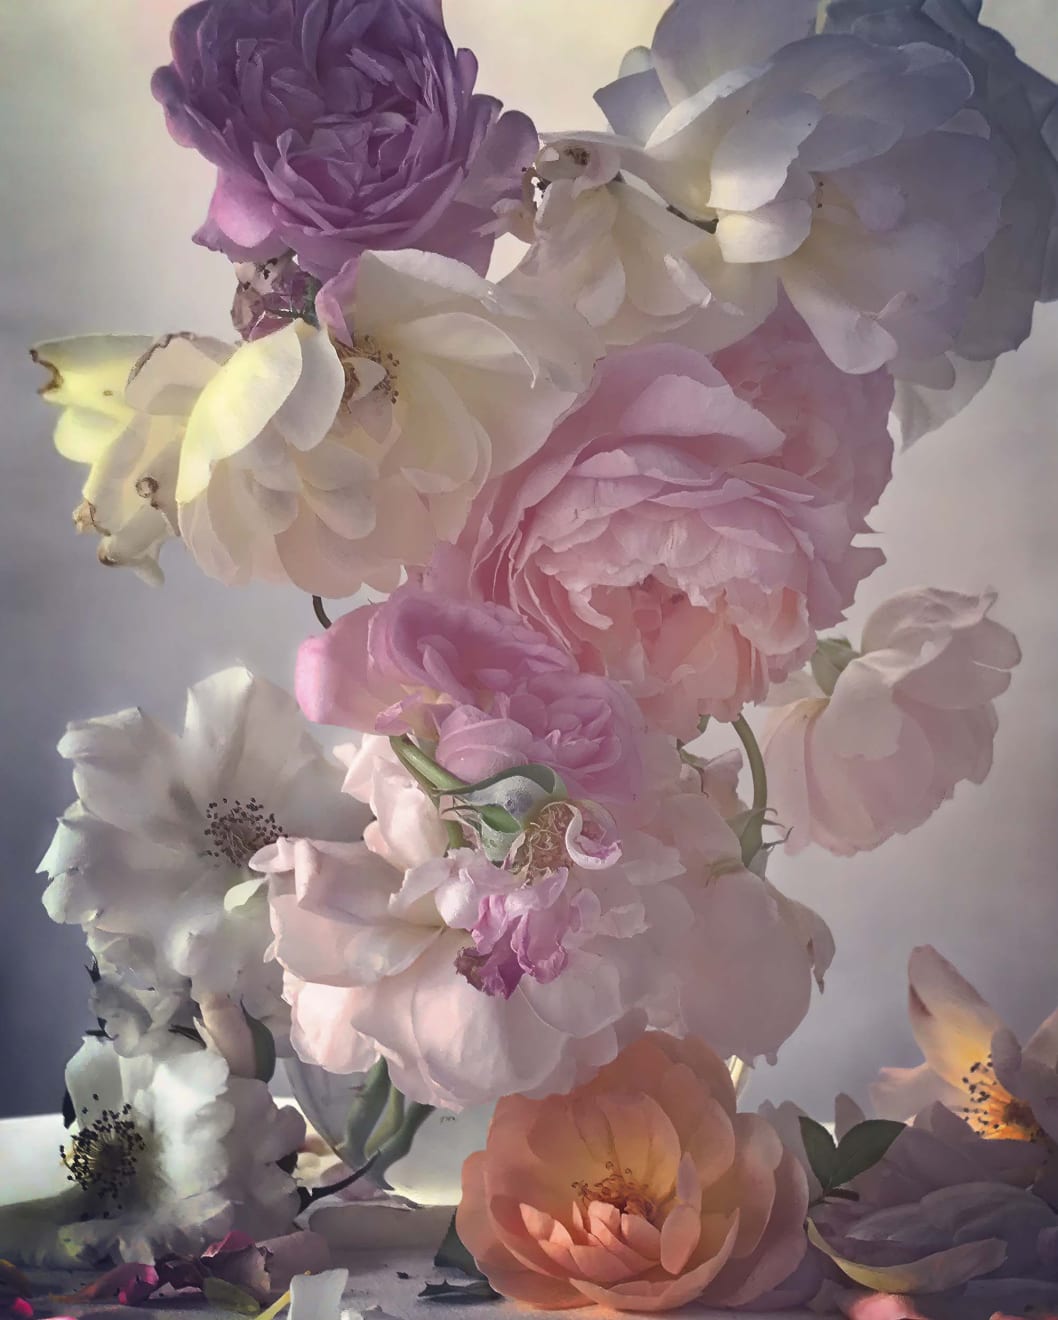 Nick Knight Sunday 25th June, 2017, 2019 Hand-coated pigment print (KNI 008)